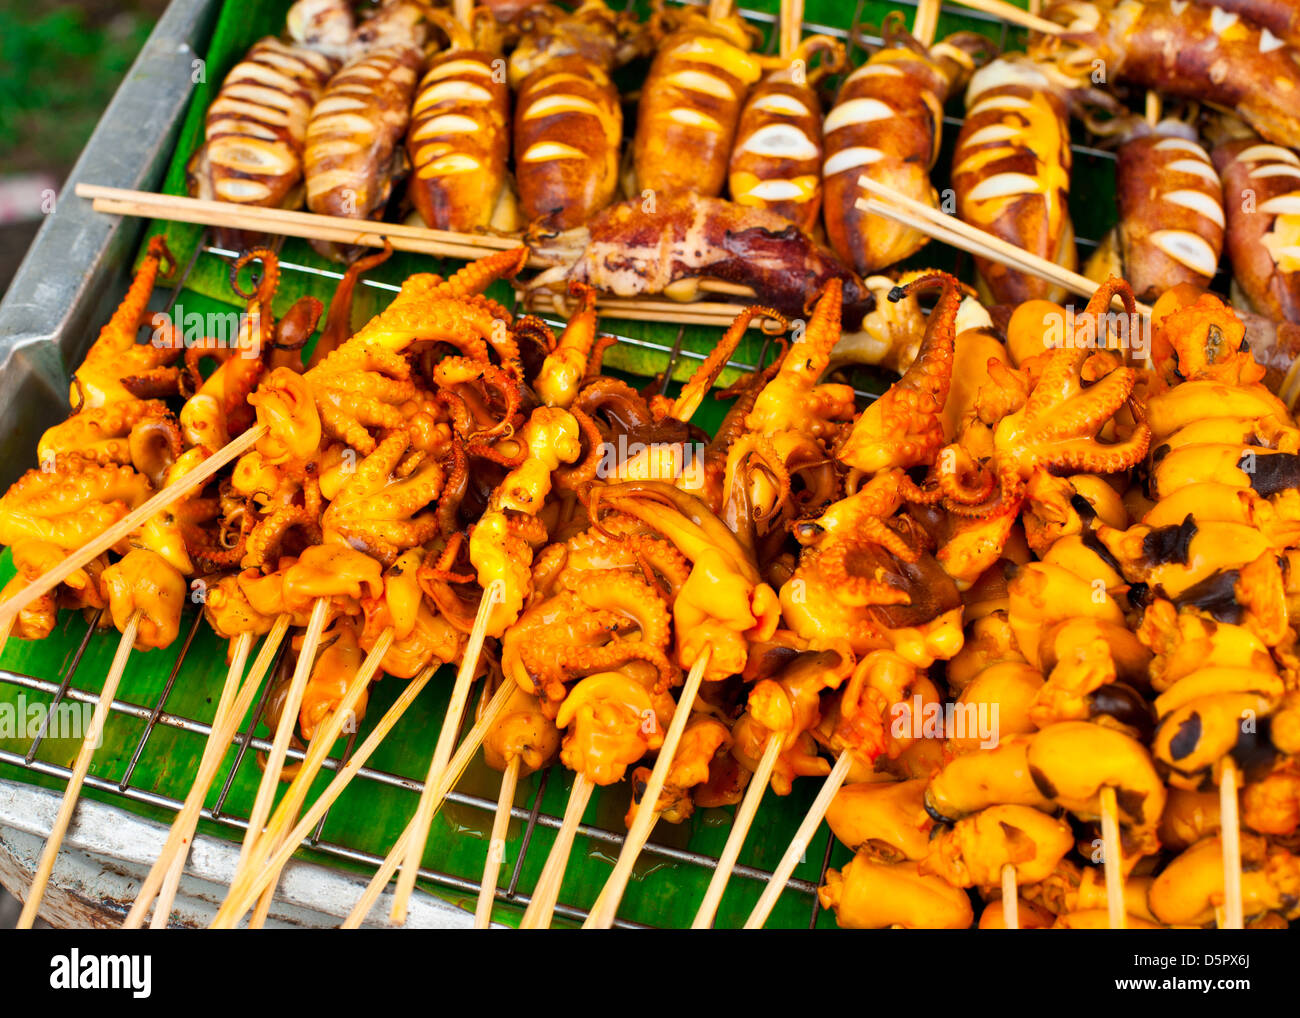 Traditional Thai food at market. Grilled seafood on sticks. Calamari, octopus and cuttlefish Stock Photo